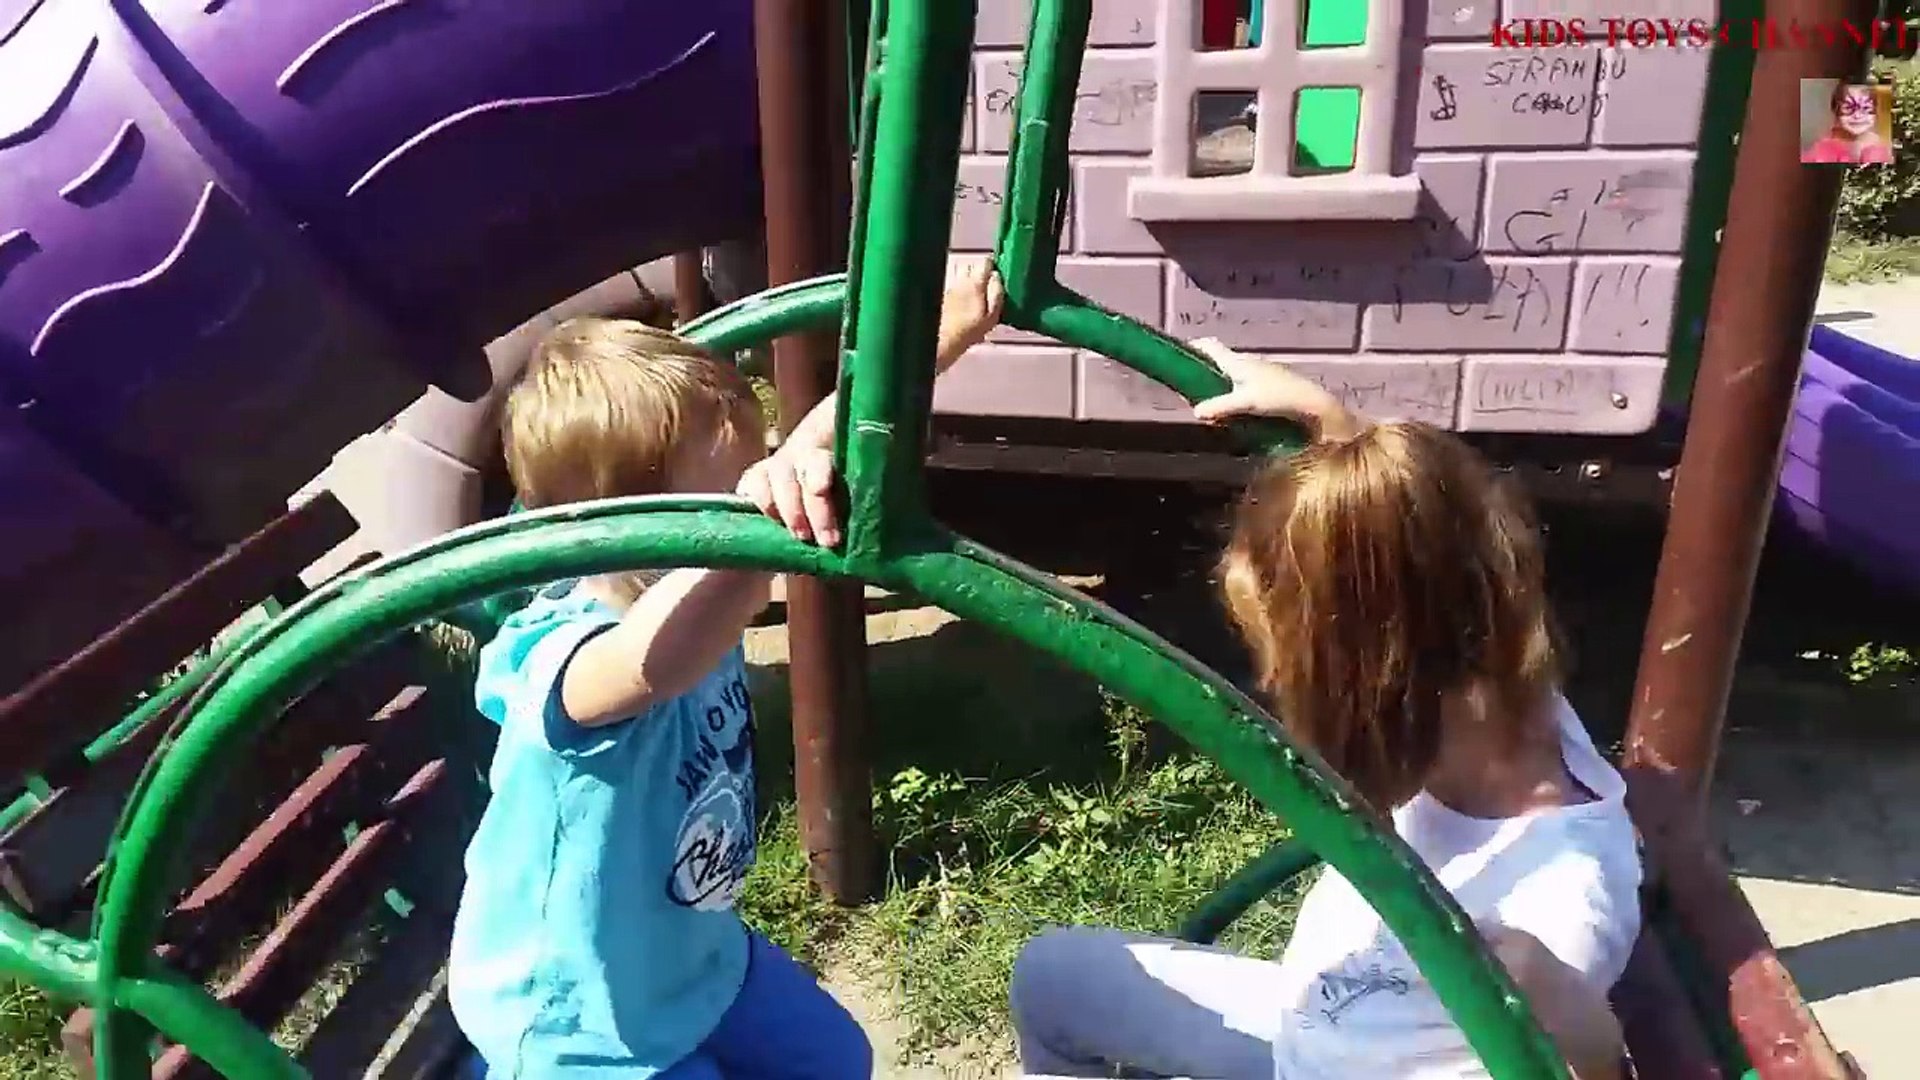 Outdoor playground for kids. Kids playing in funny play place. VIDEO KIDS TOYS CHANNEL